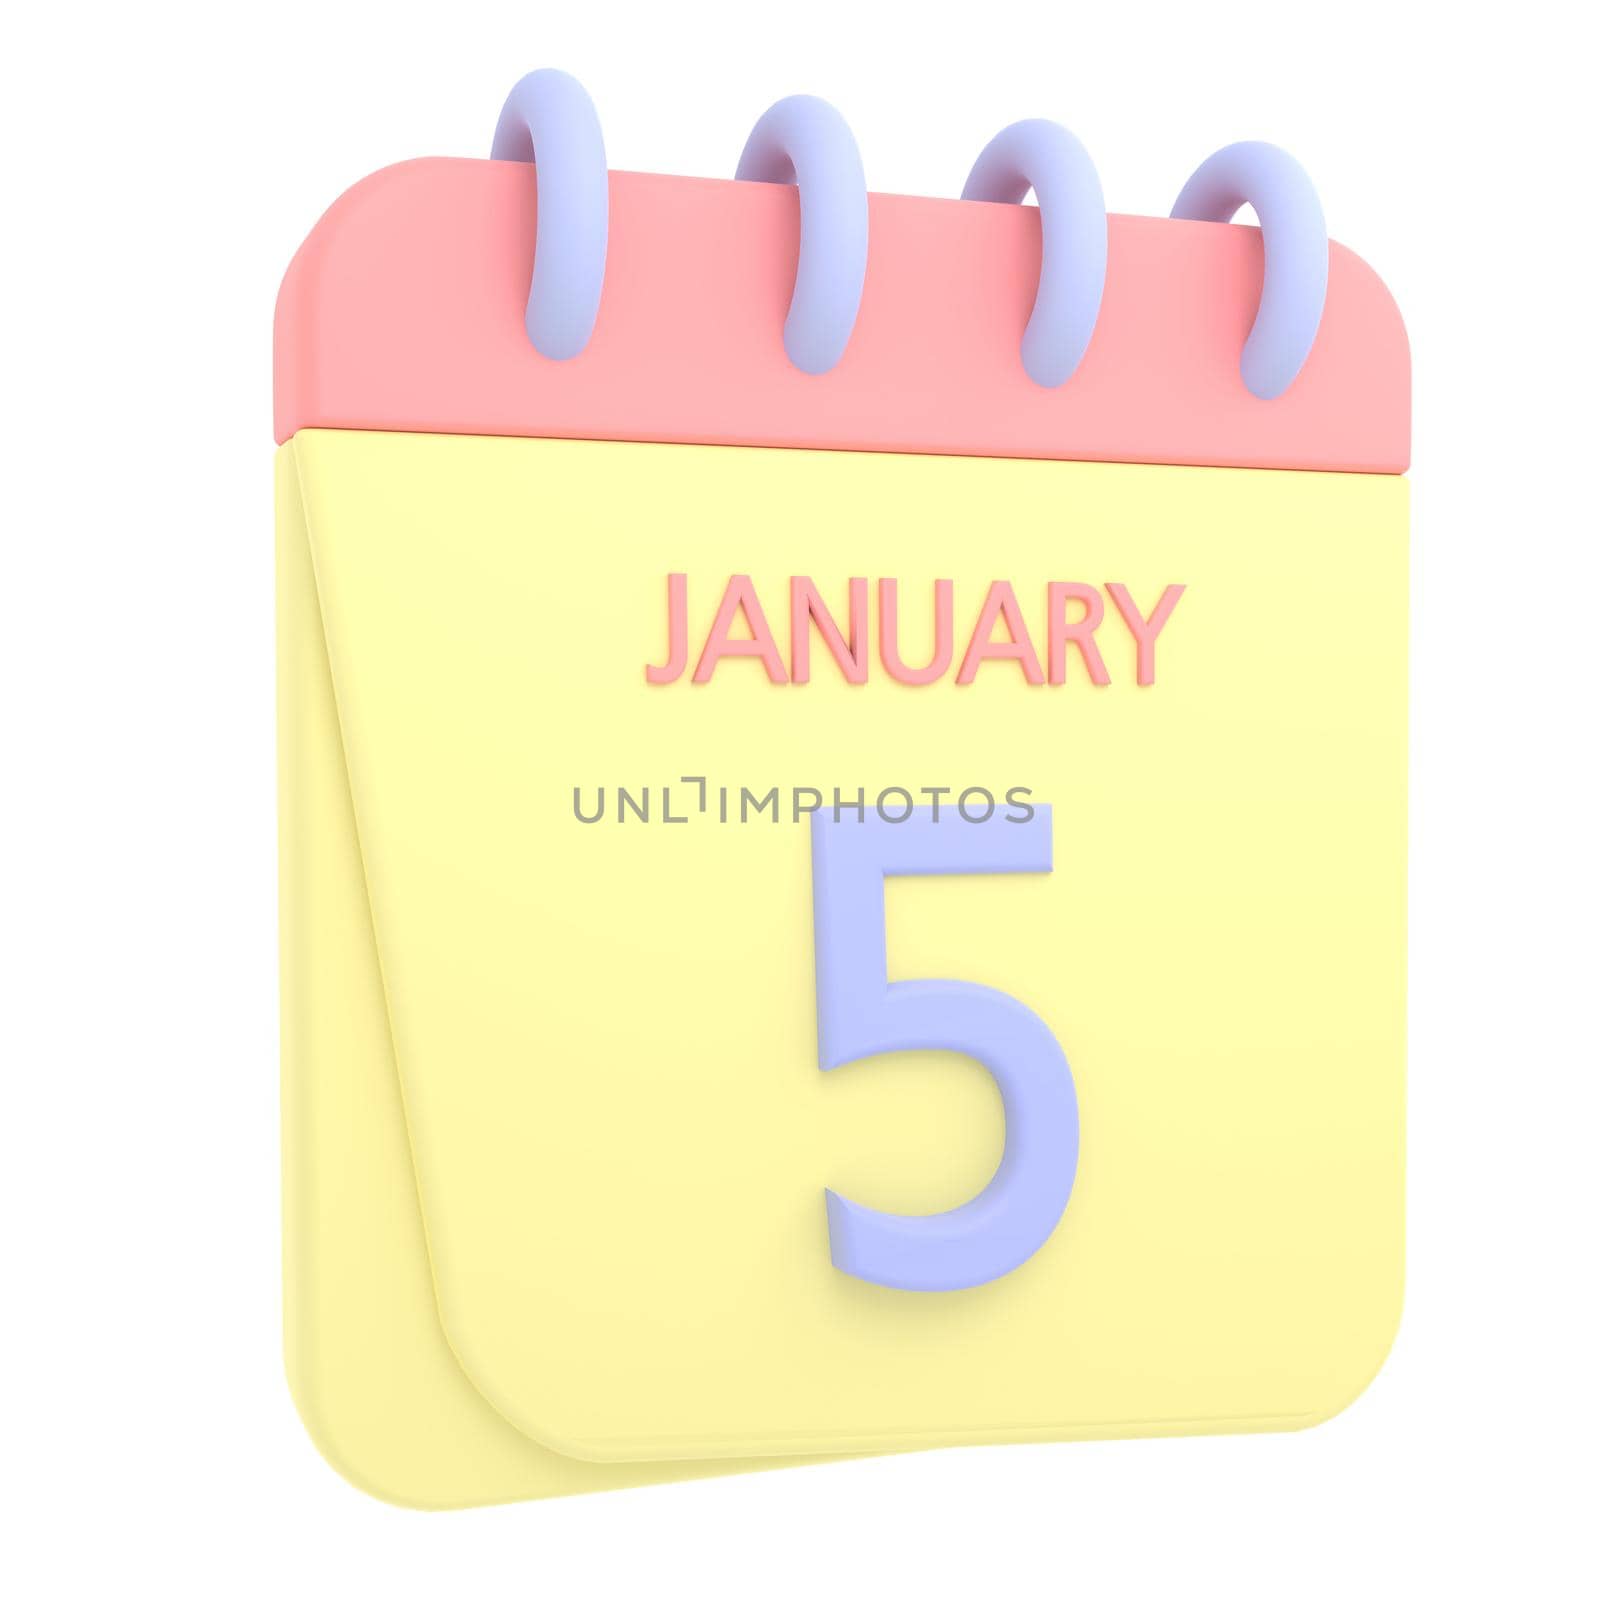 5th January 3D calendar icon. Web style. High resolution image. White background